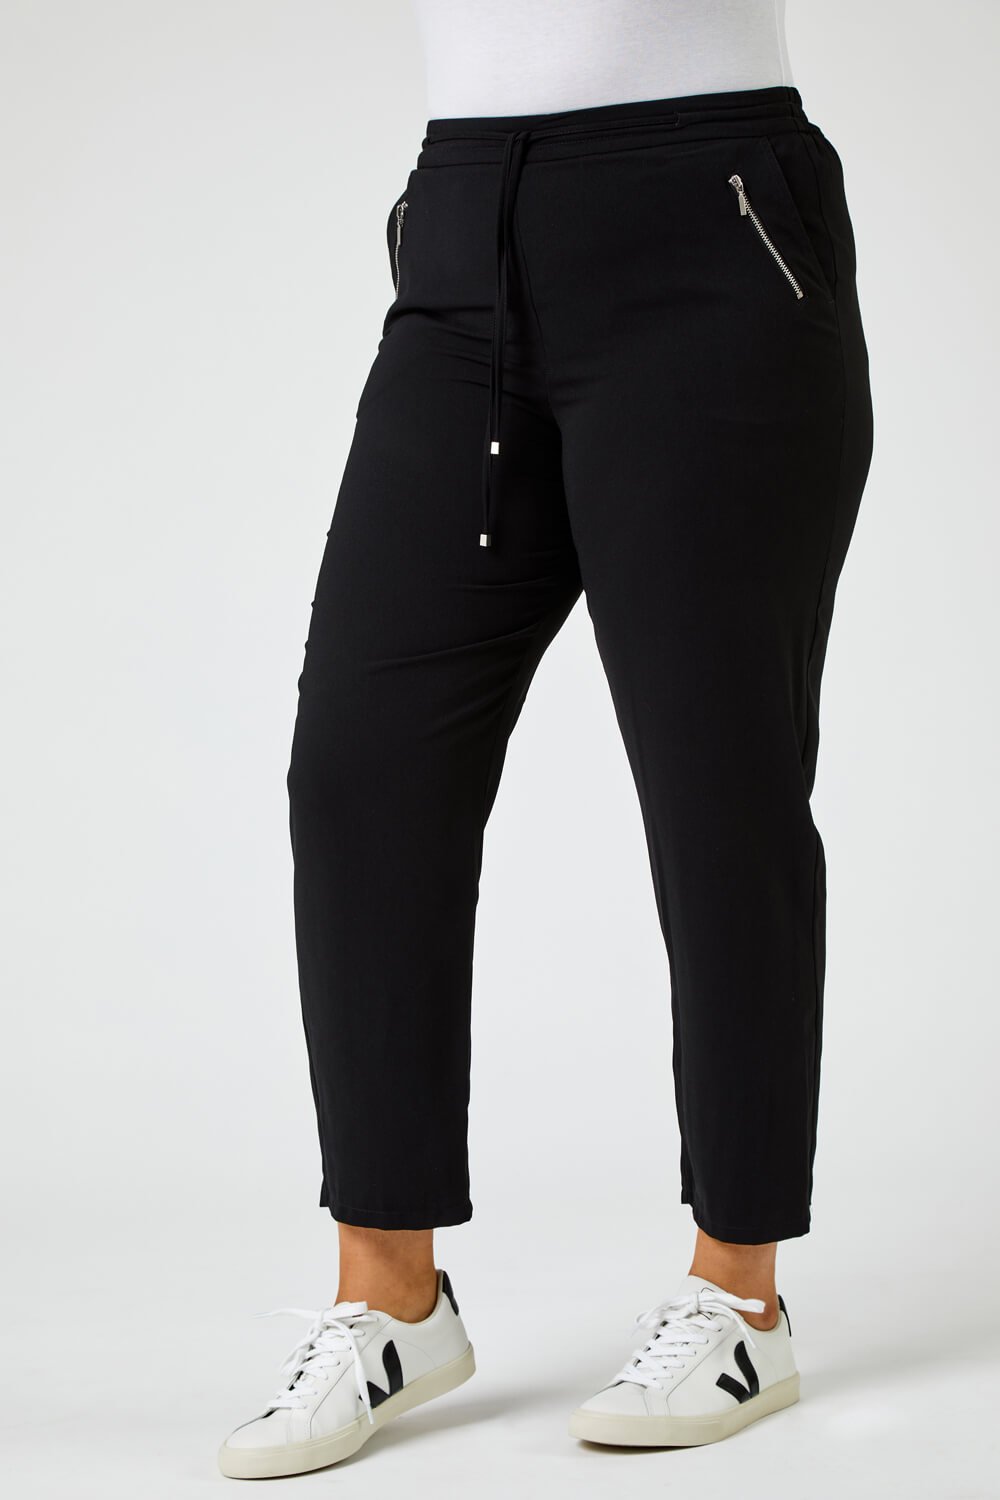 Black Curve 27" Tie Front Joggers, Image 2 of 5